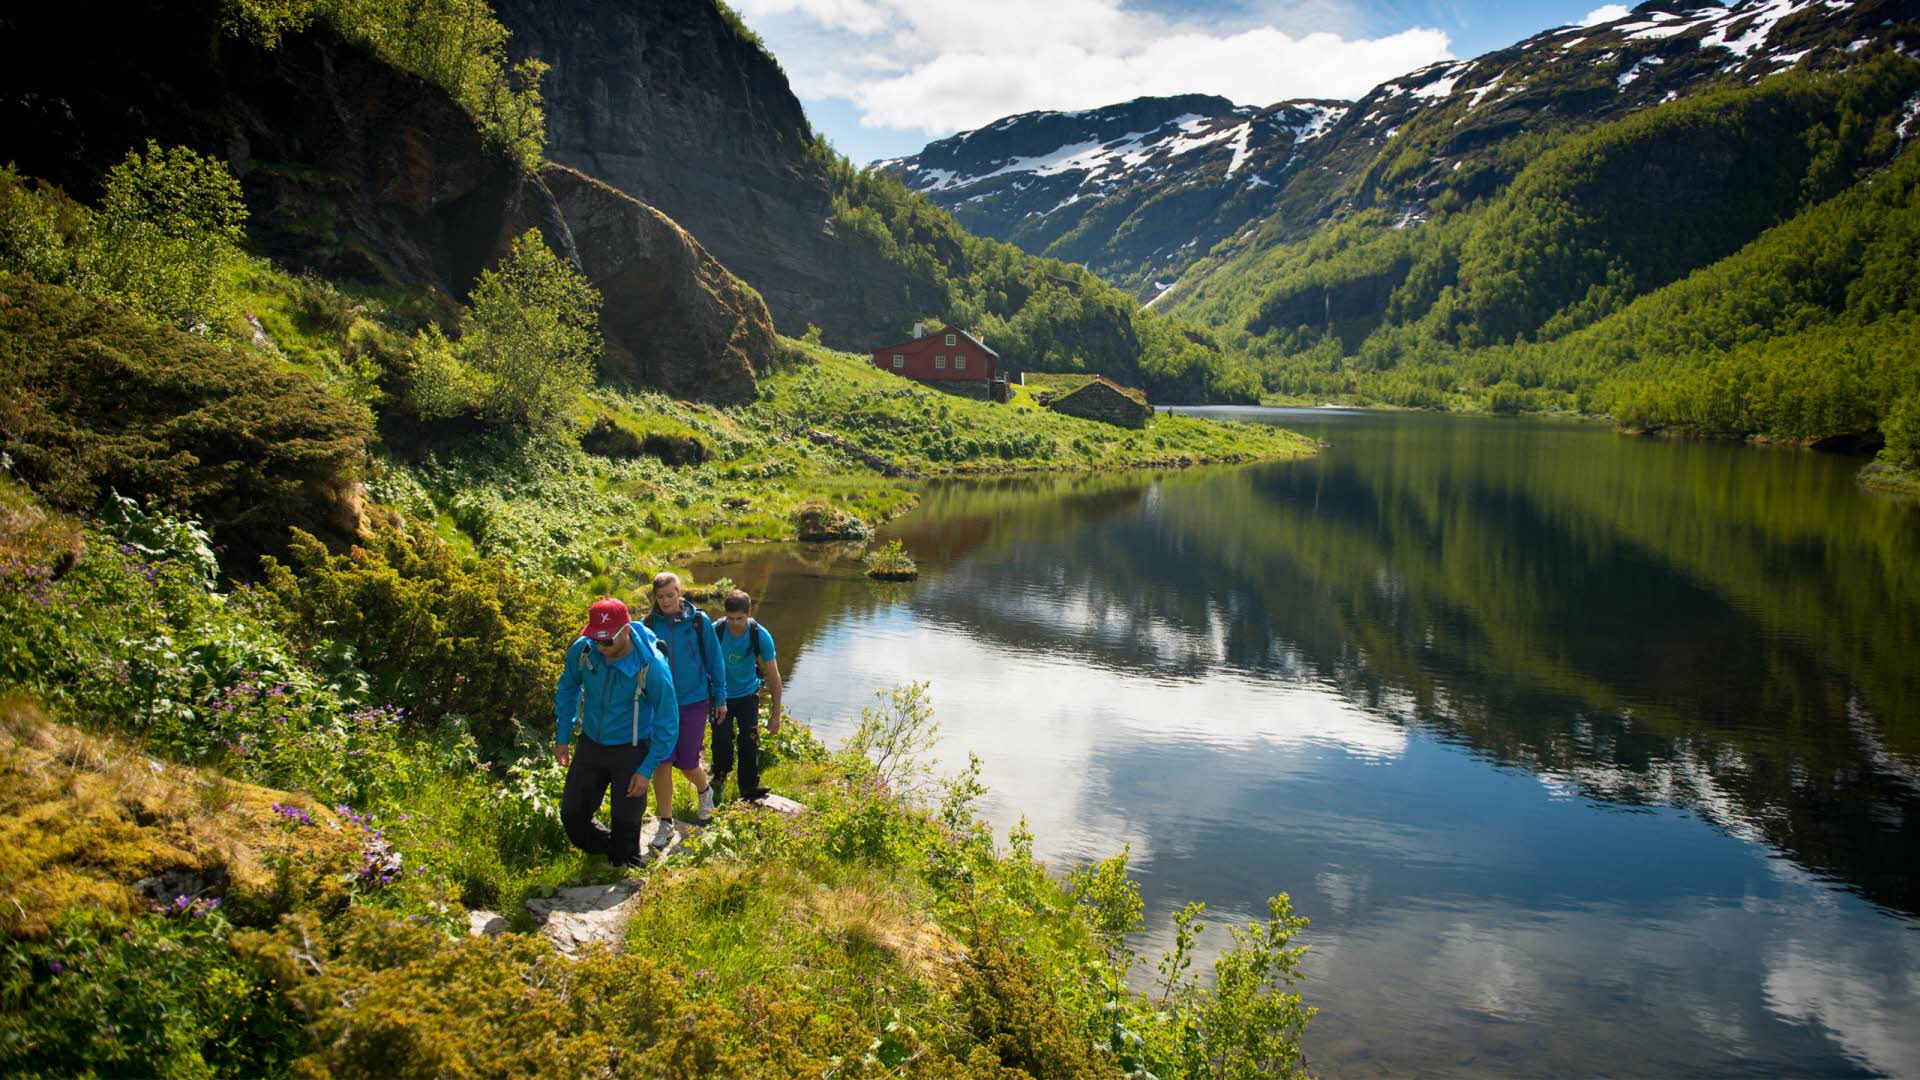 3 hikers walk along still waters in the beautiful and dramatic Aurlandsdalen Valley in summer